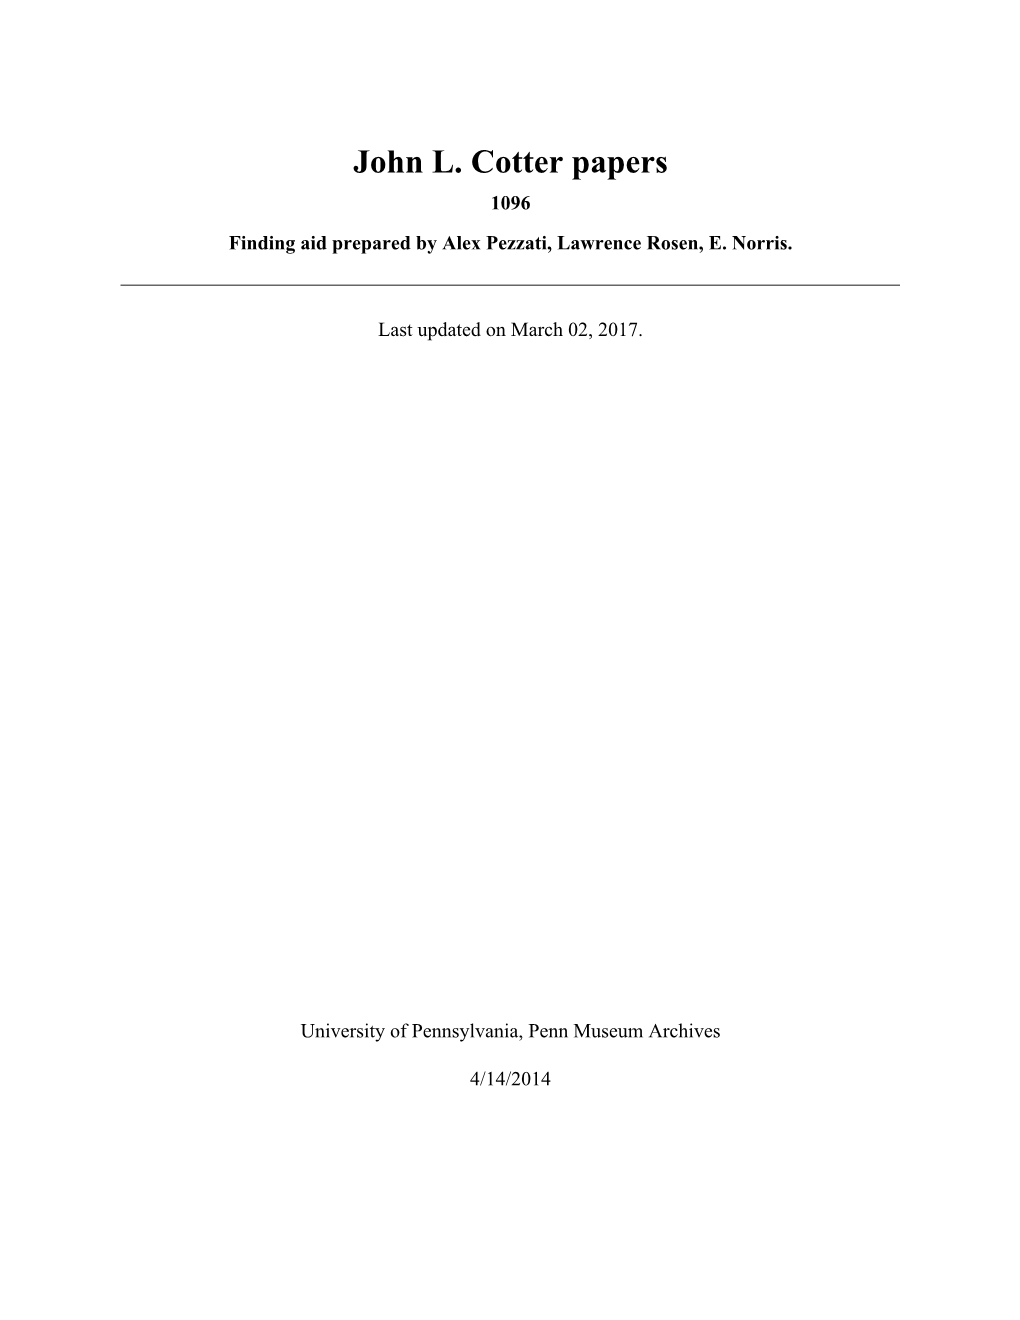 John L. Cotter Papers 1096 Finding Aid Prepared by Alex Pezzati, Lawrence Rosen, E